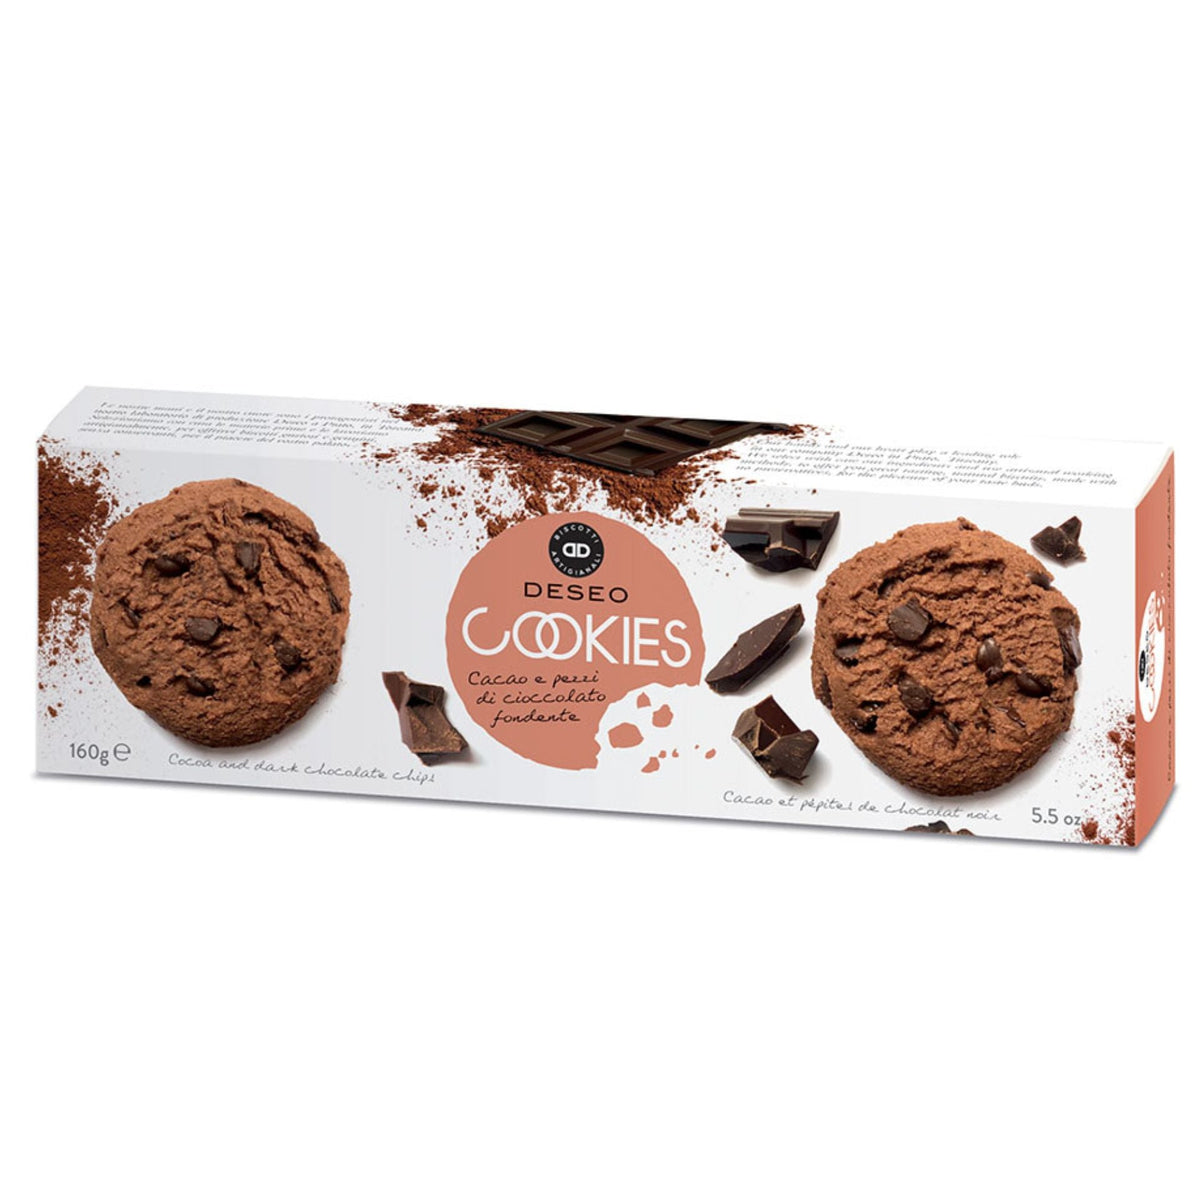 Deseo Cocoa &amp; Dark Chocolate Cookies 160g (Box)  | Imported and distributed in the UK by Just Gourmet Foods